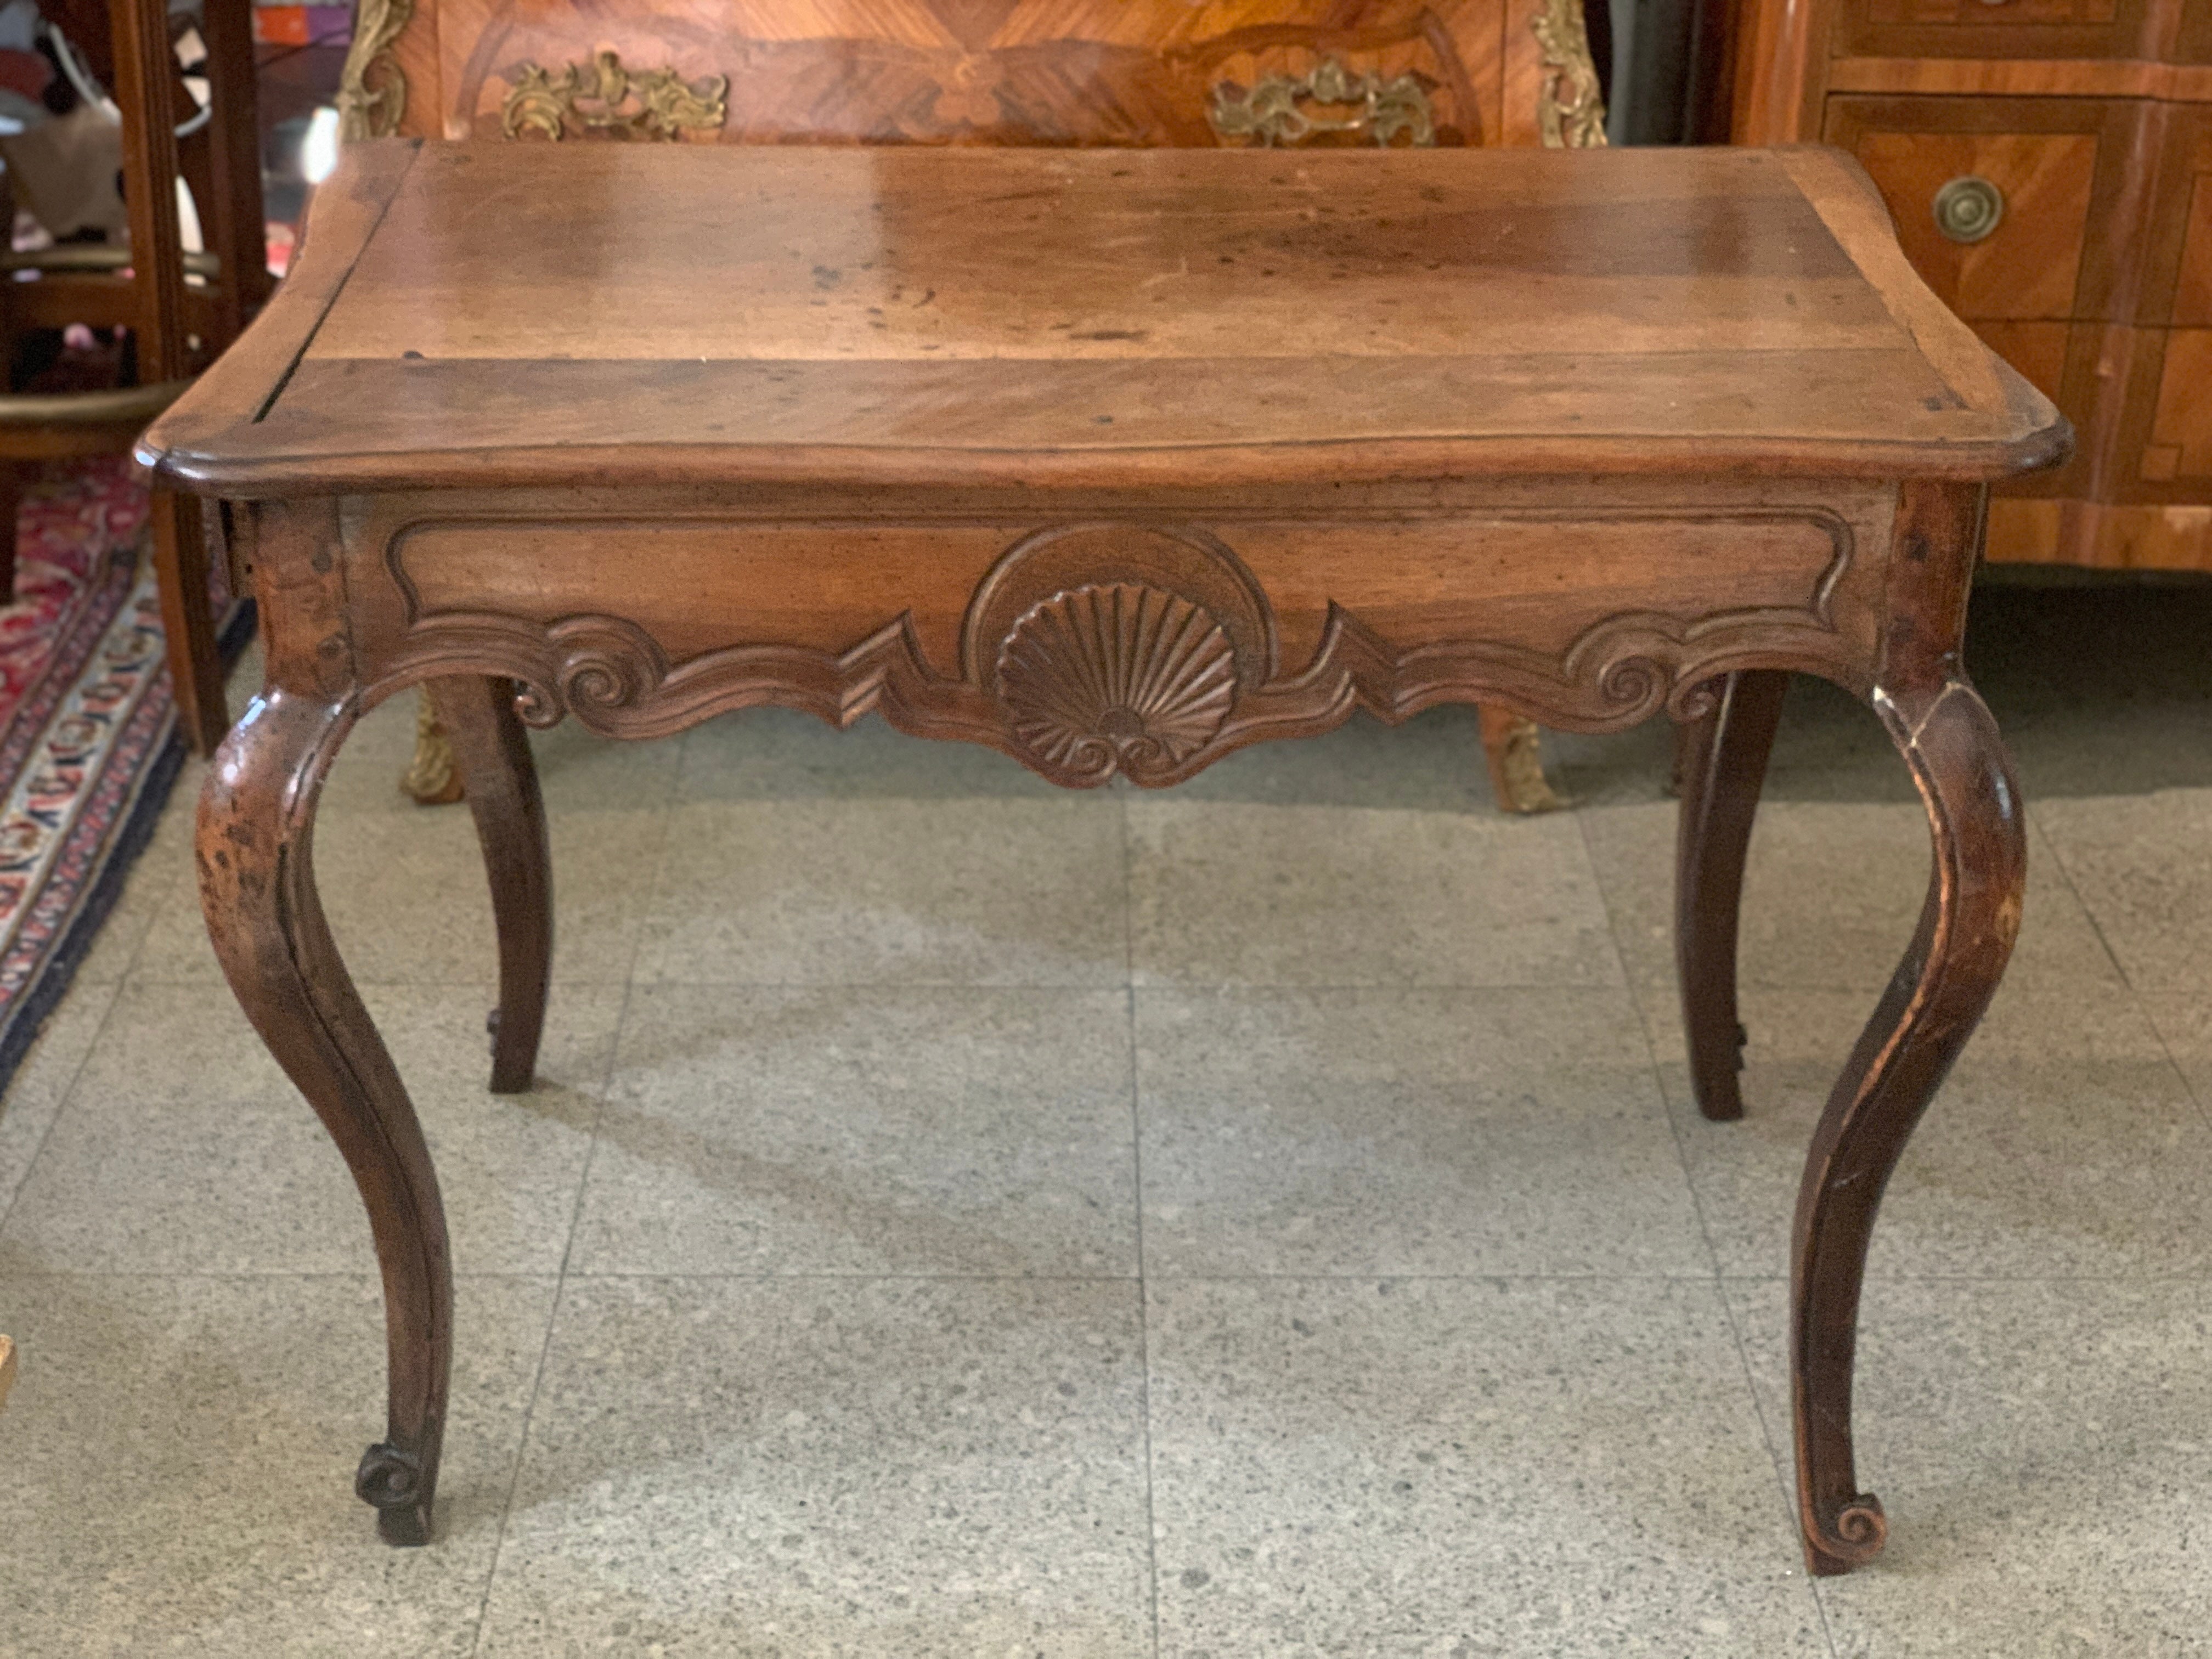 18th century French hand carved walnut writing table with two side drawers resting on curved decorated legs. The table is in it authentic condition with no restorations made. The condition is quite good according to the age and use of the piece.